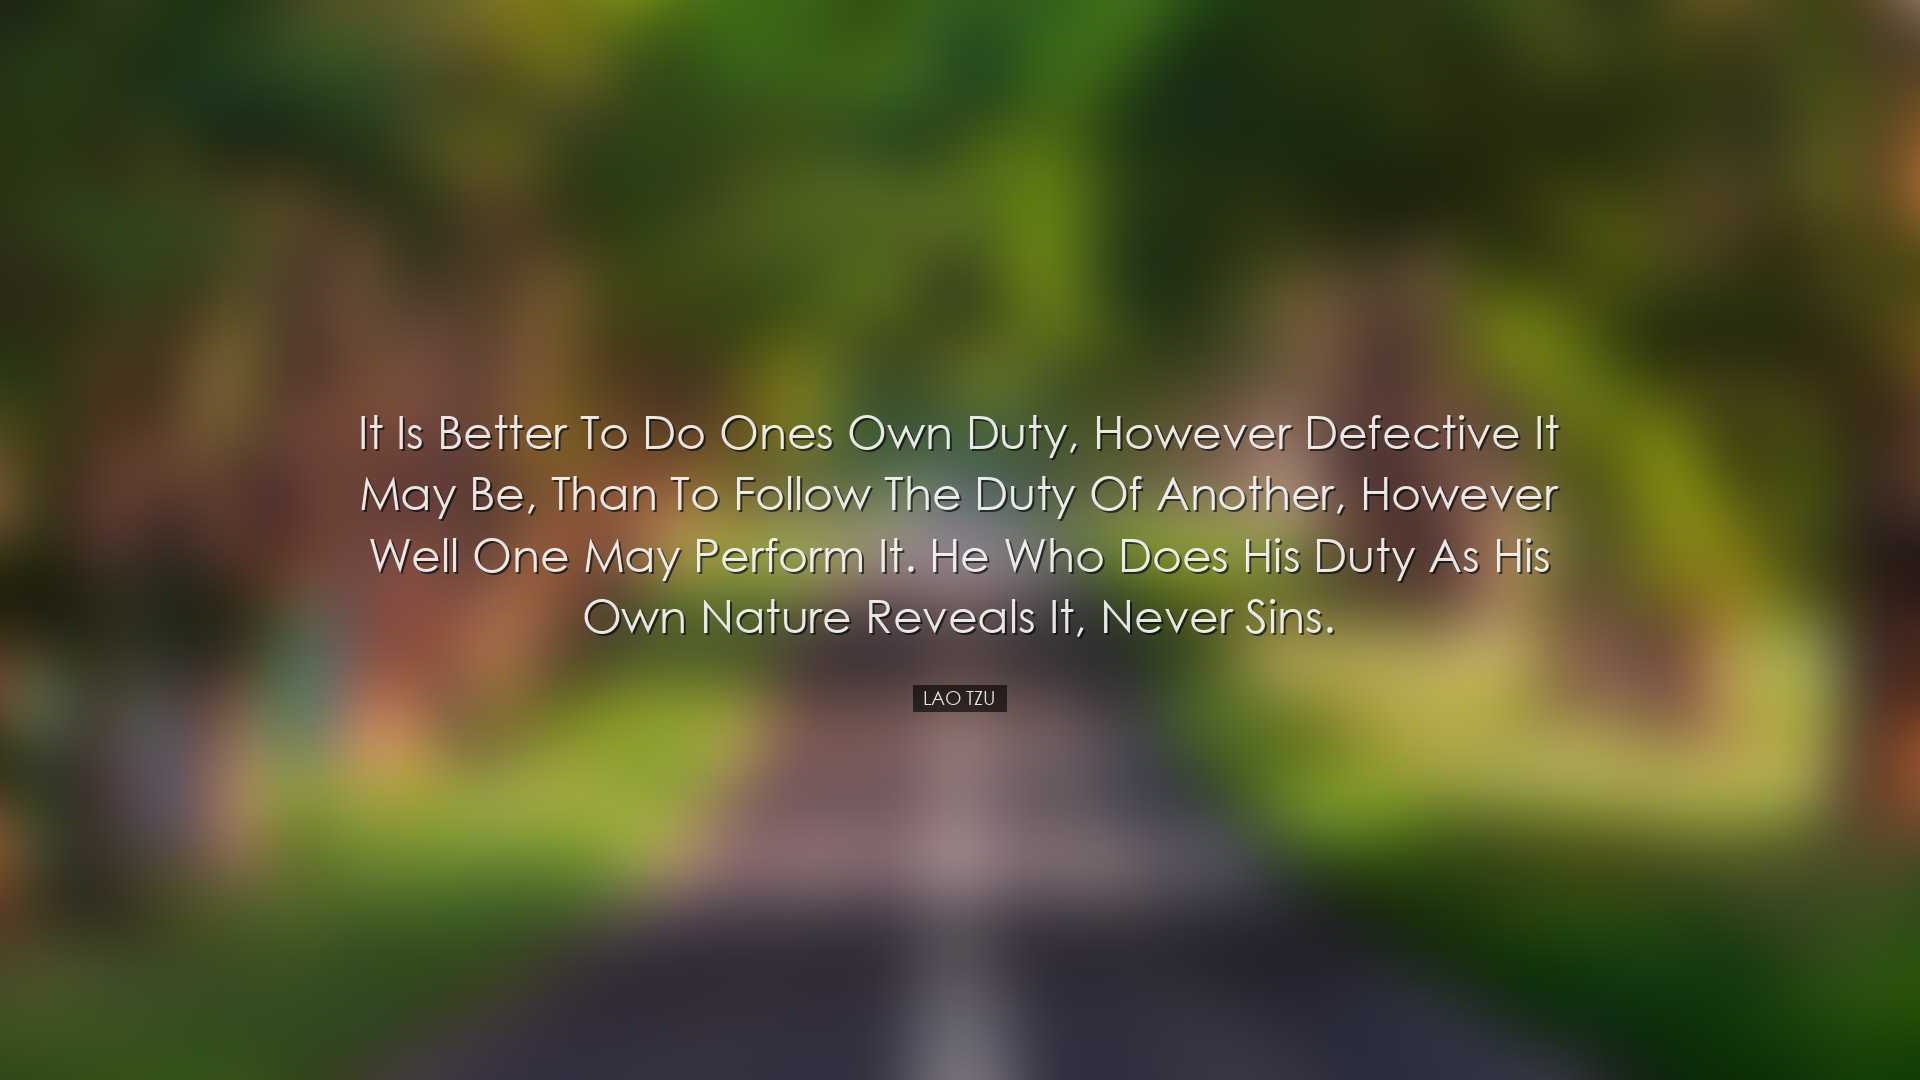 It is better to do ones own duty, however defective it may be, tha